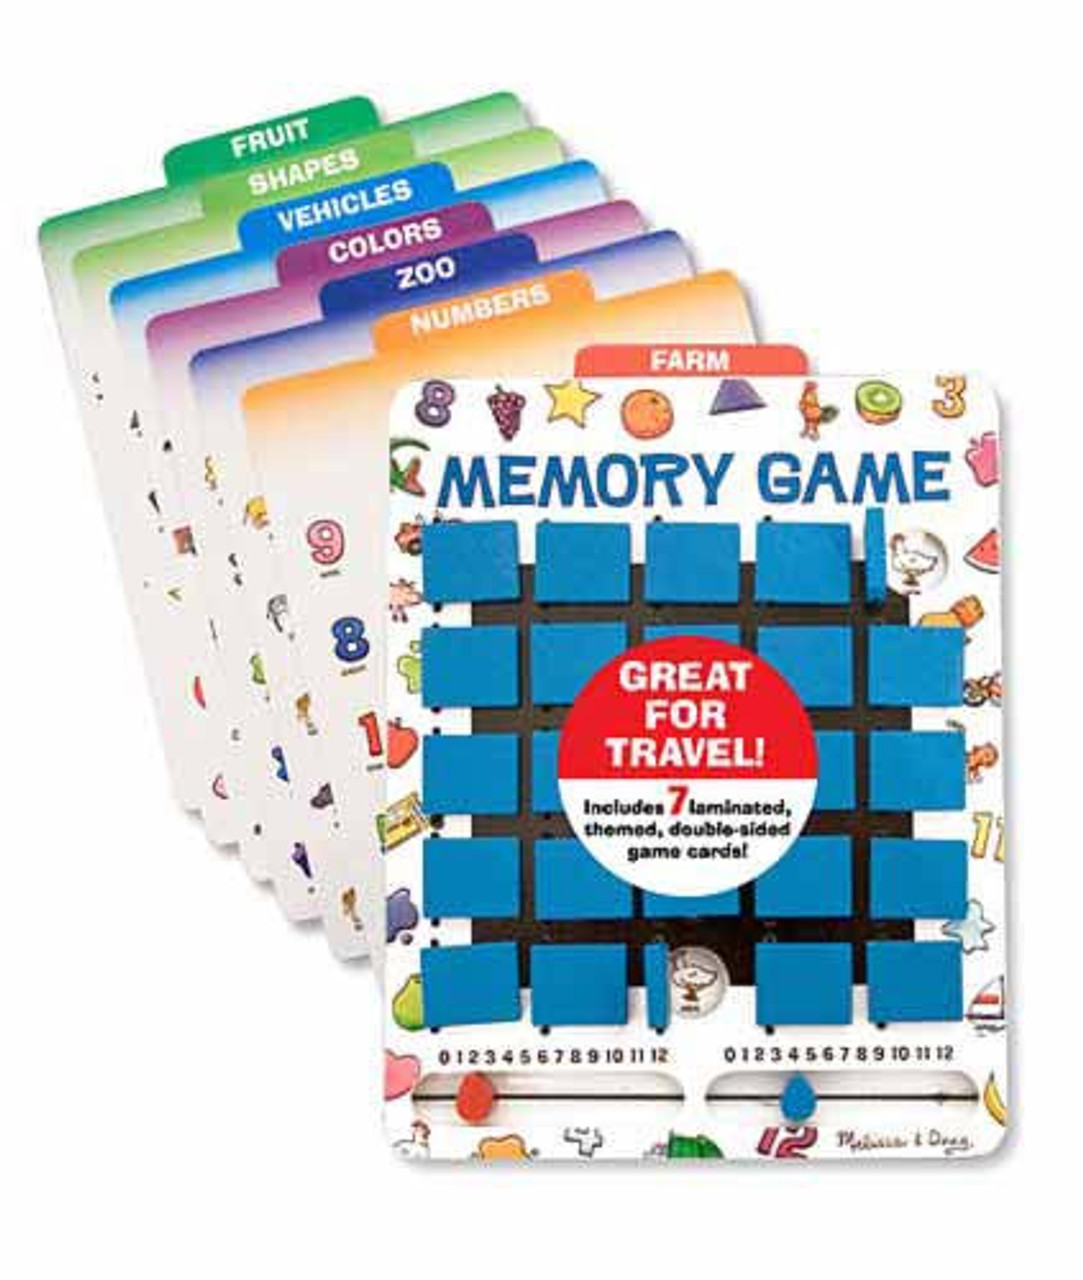 10 Great Travel Games for Kids! - MomOf6